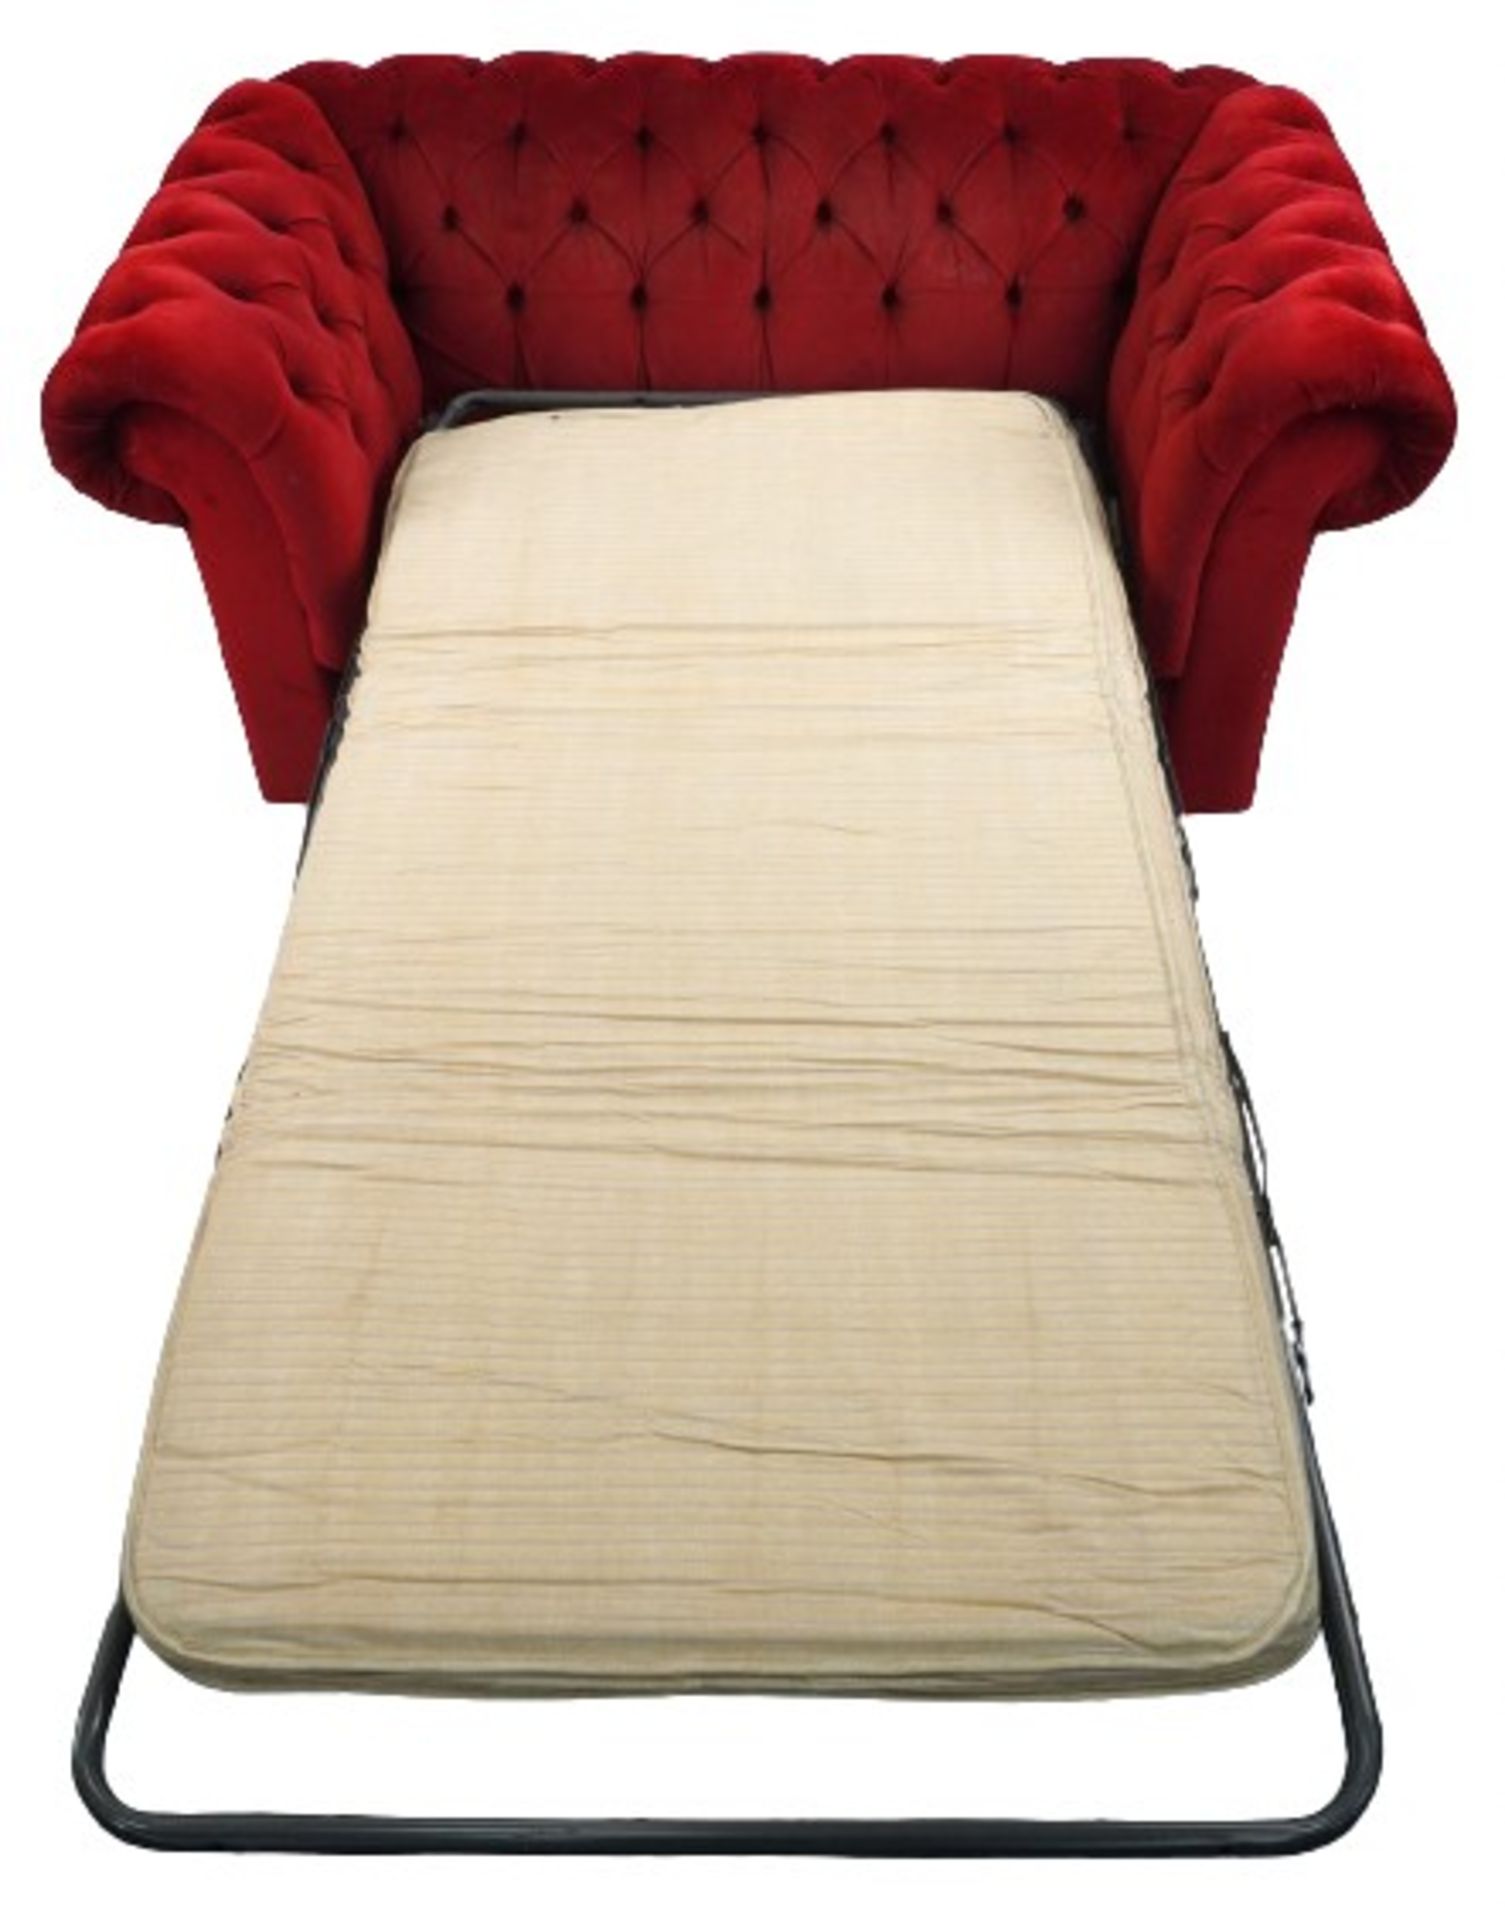 Chesterfield two seater settee/sofa bed with red button back upholstery, 73cm H x 152cm W x 88cm D - Bild 3 aus 4